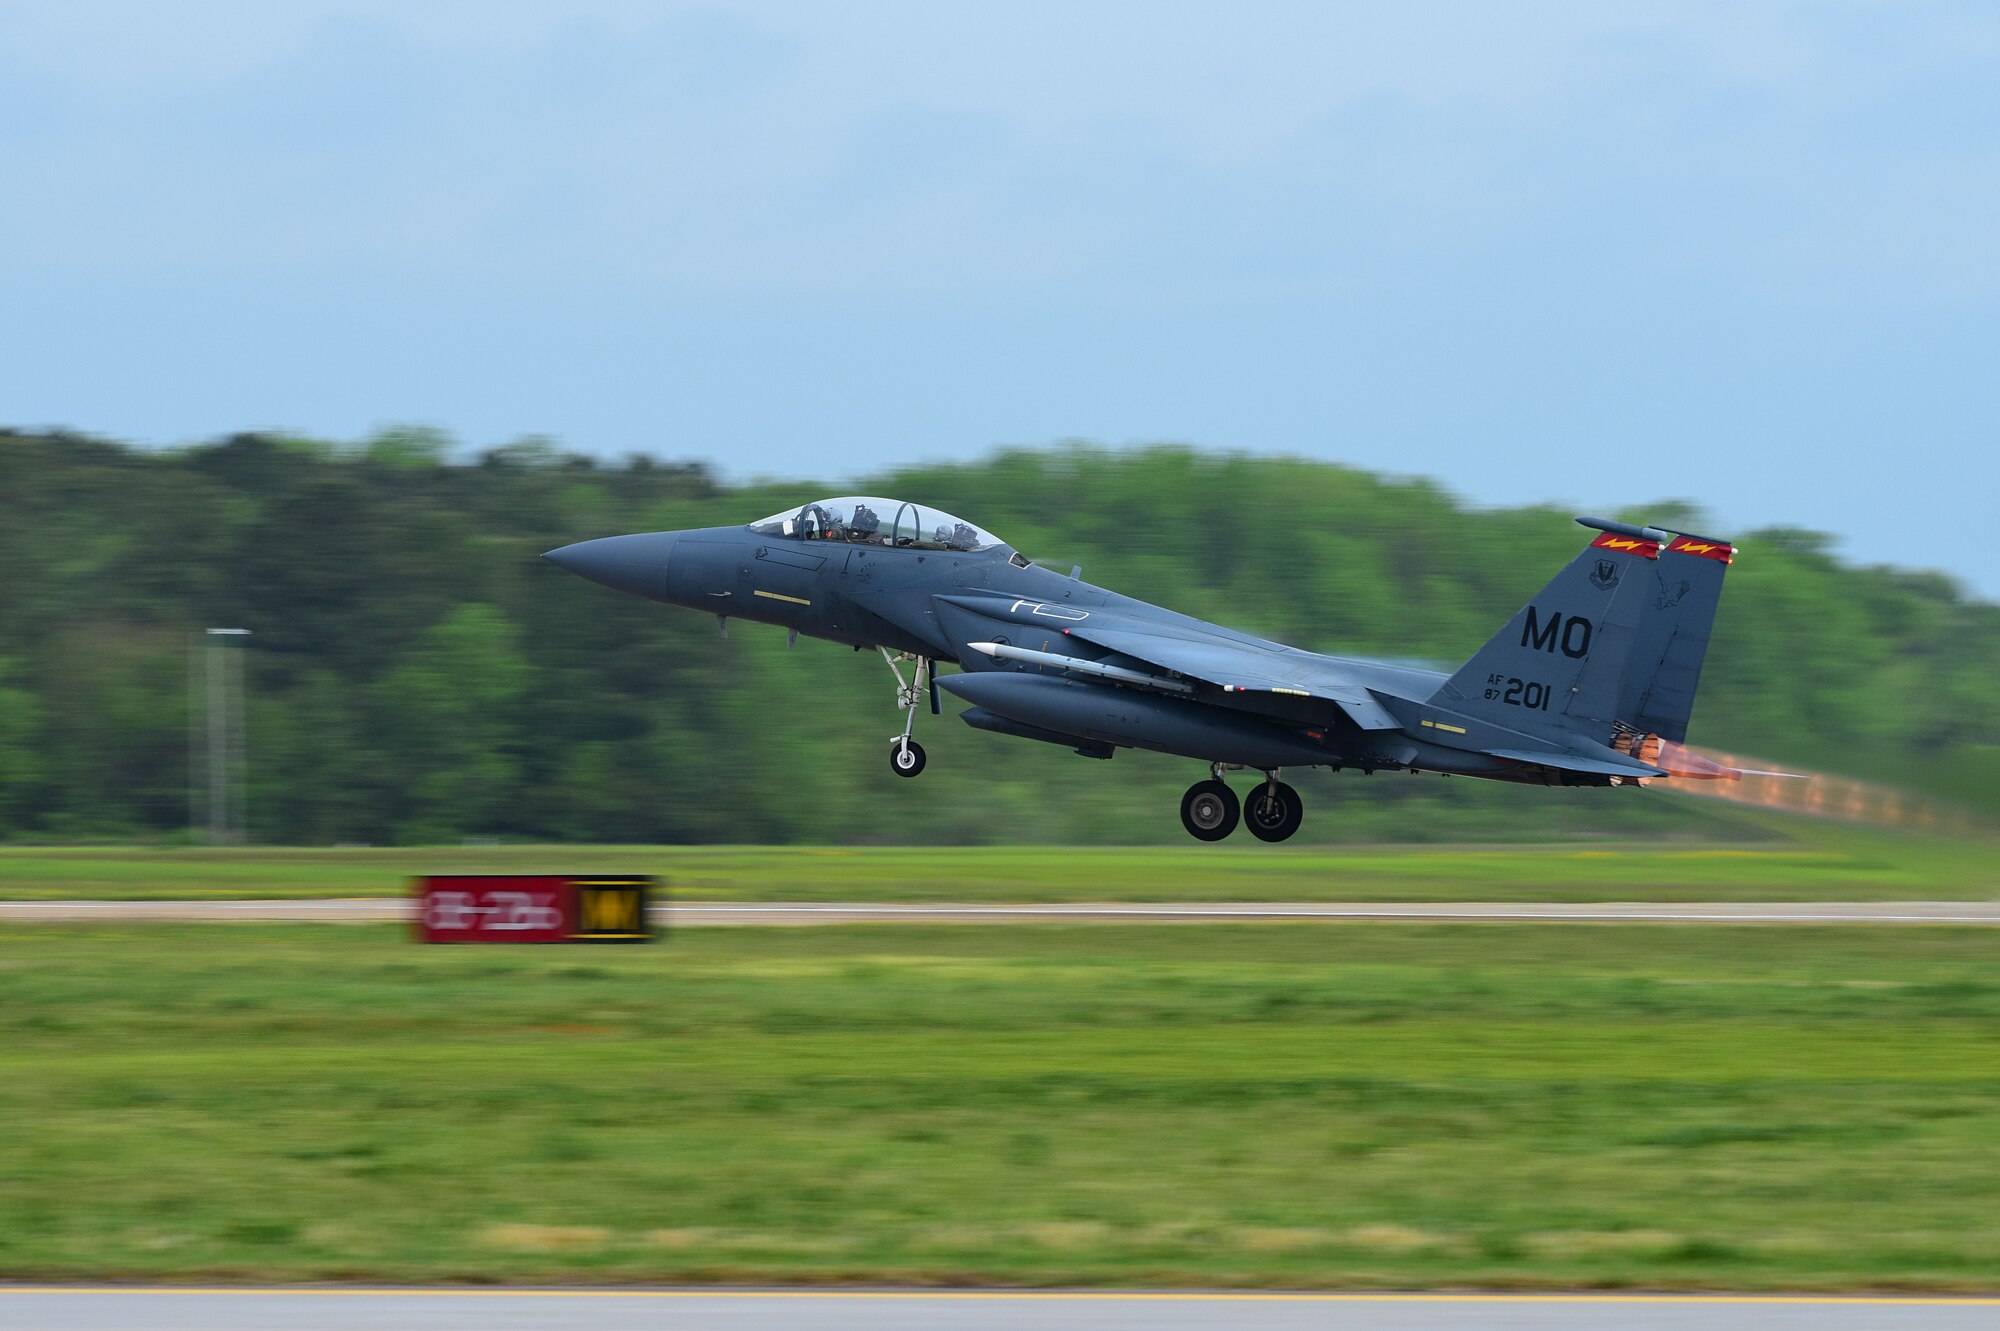 A U.S. Air Force F-15E Strike Eagle assigned to Mountain Home Air Force Base, Idaho, takes off for ATLANTIC TRIDENT 17 at Joint Base Langley-Eustis, Va., April 20, 2017. The exercise aims to allow sharing and development of techniques, tactics and procedures between U.S. Air Force, French air force, and Royal air force frontline fighters in order to fly, fight and win in modern highly-contested environments. (U.S. Air Force Photo/Airman 1st Class Tristan Biese)